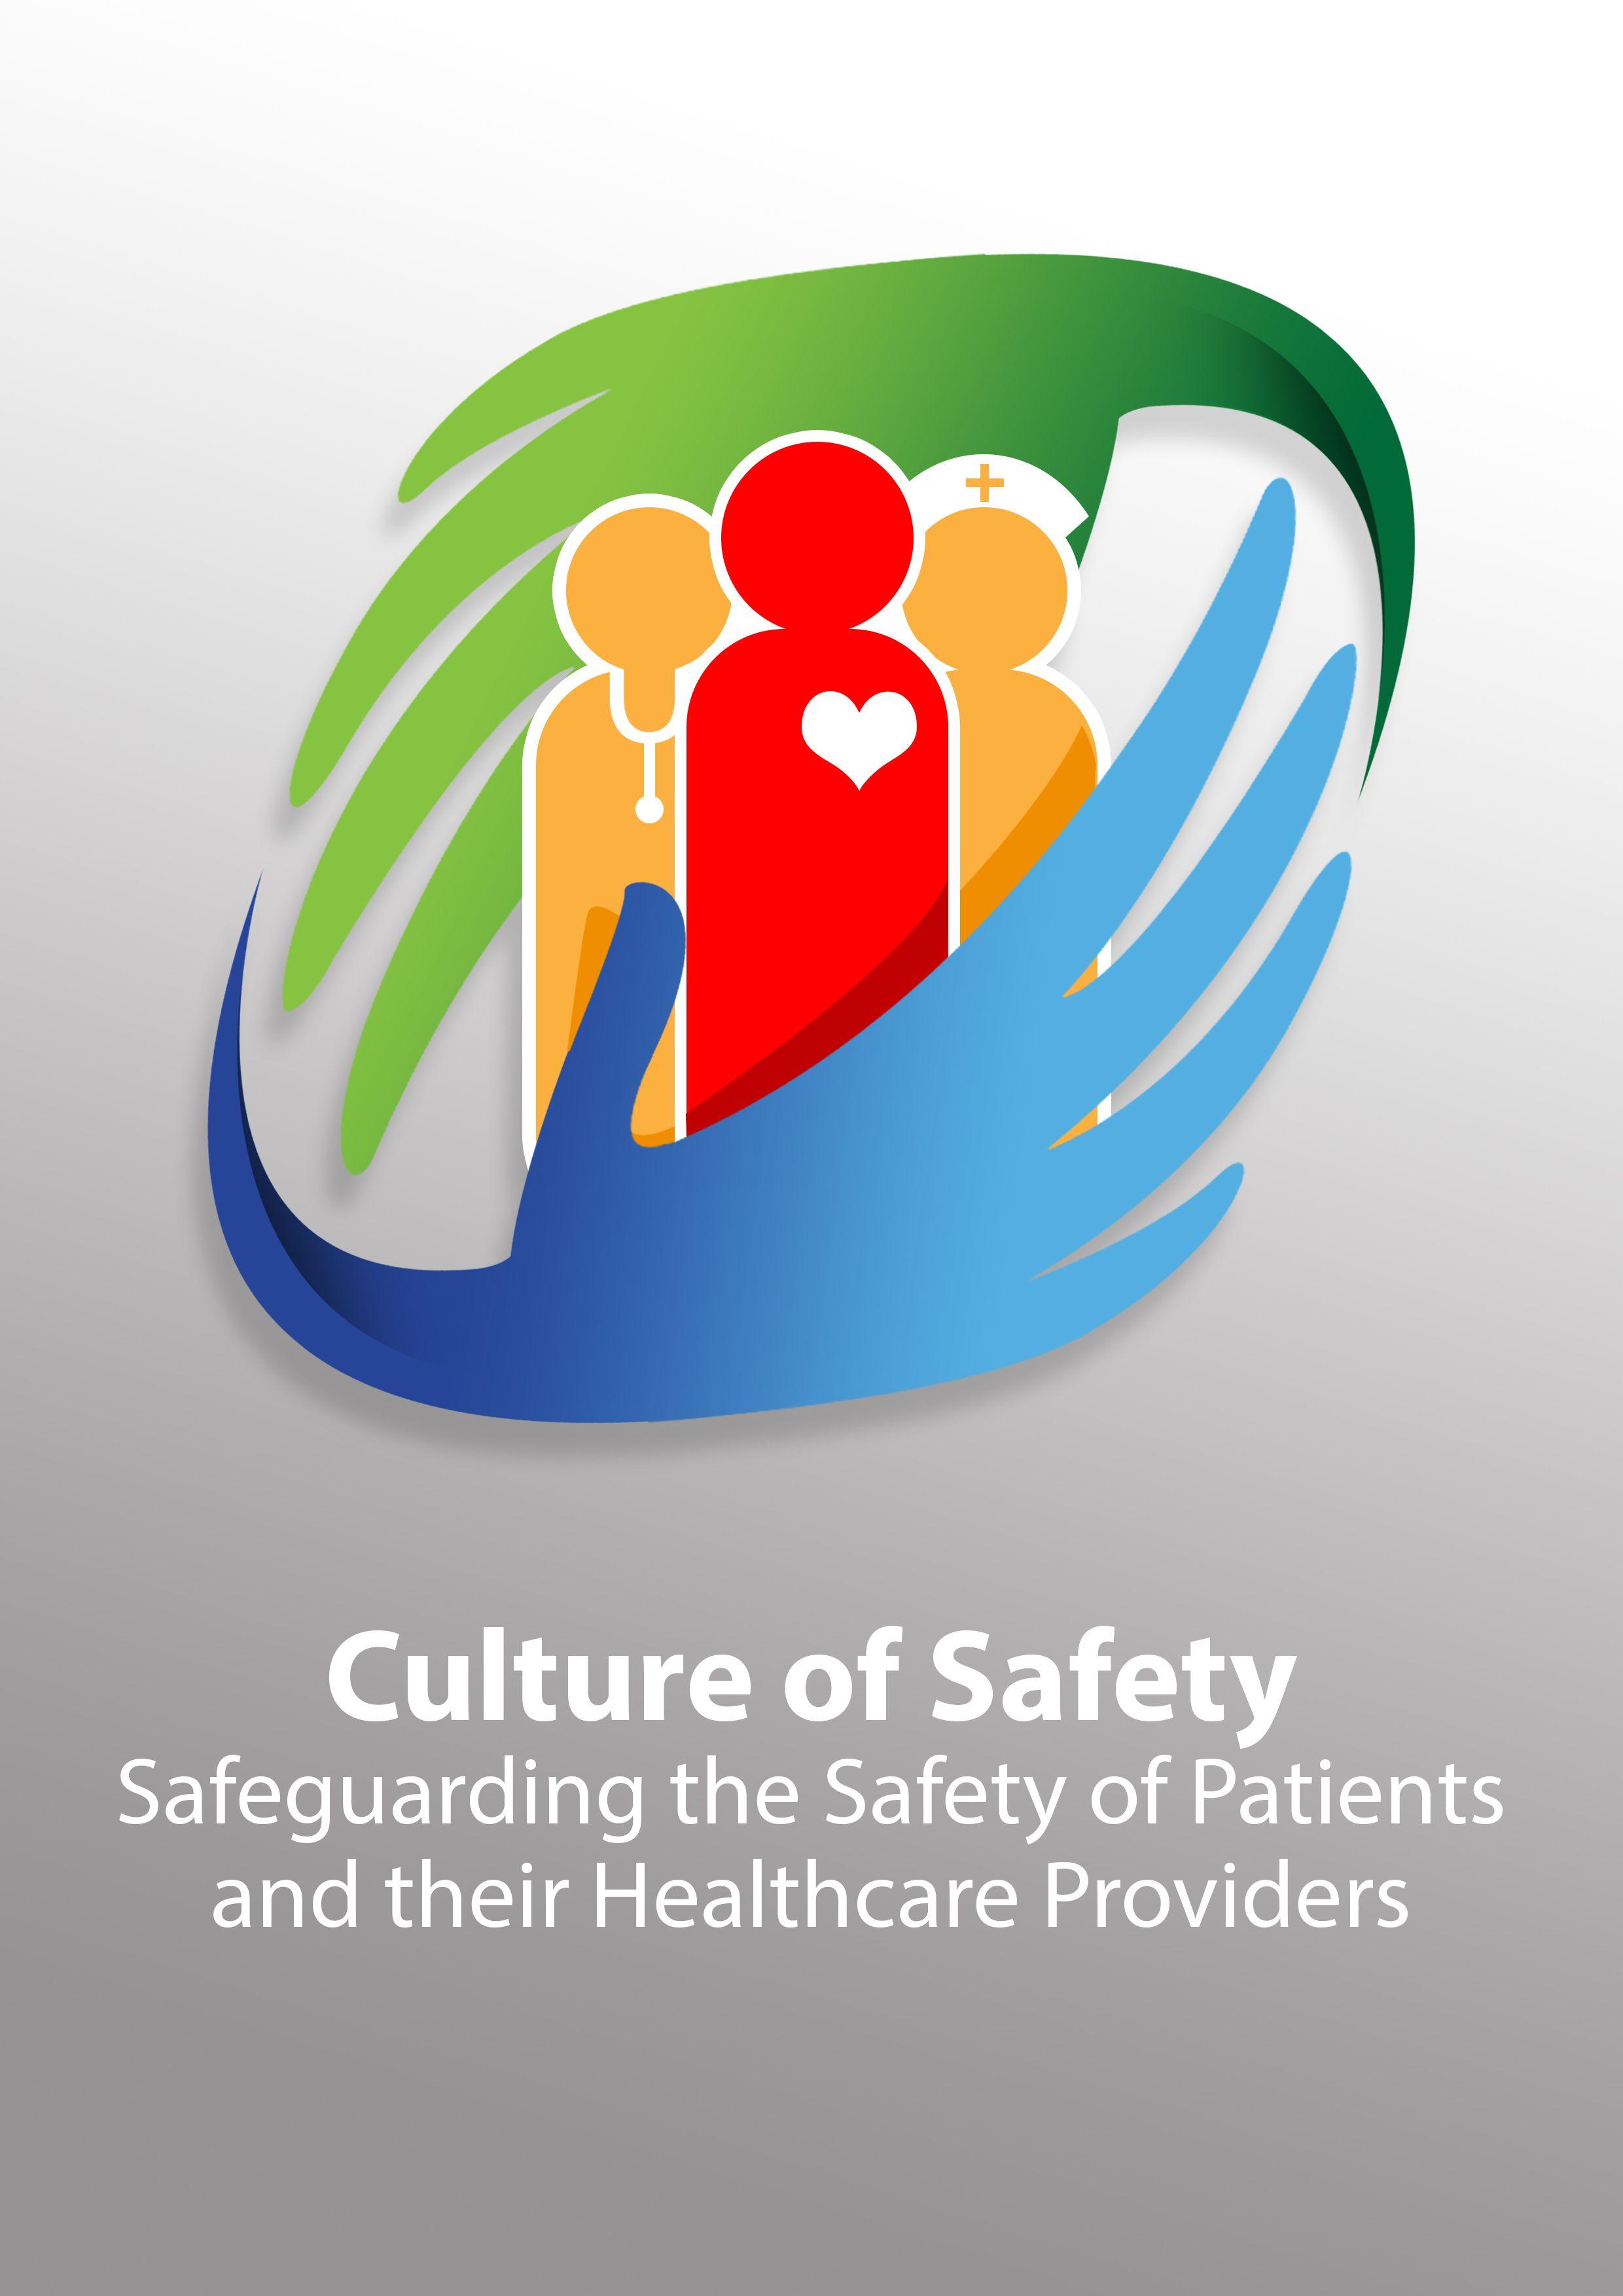 Patient Logo - PHC Tops Logo Design Contest for Patient Safety Celebration